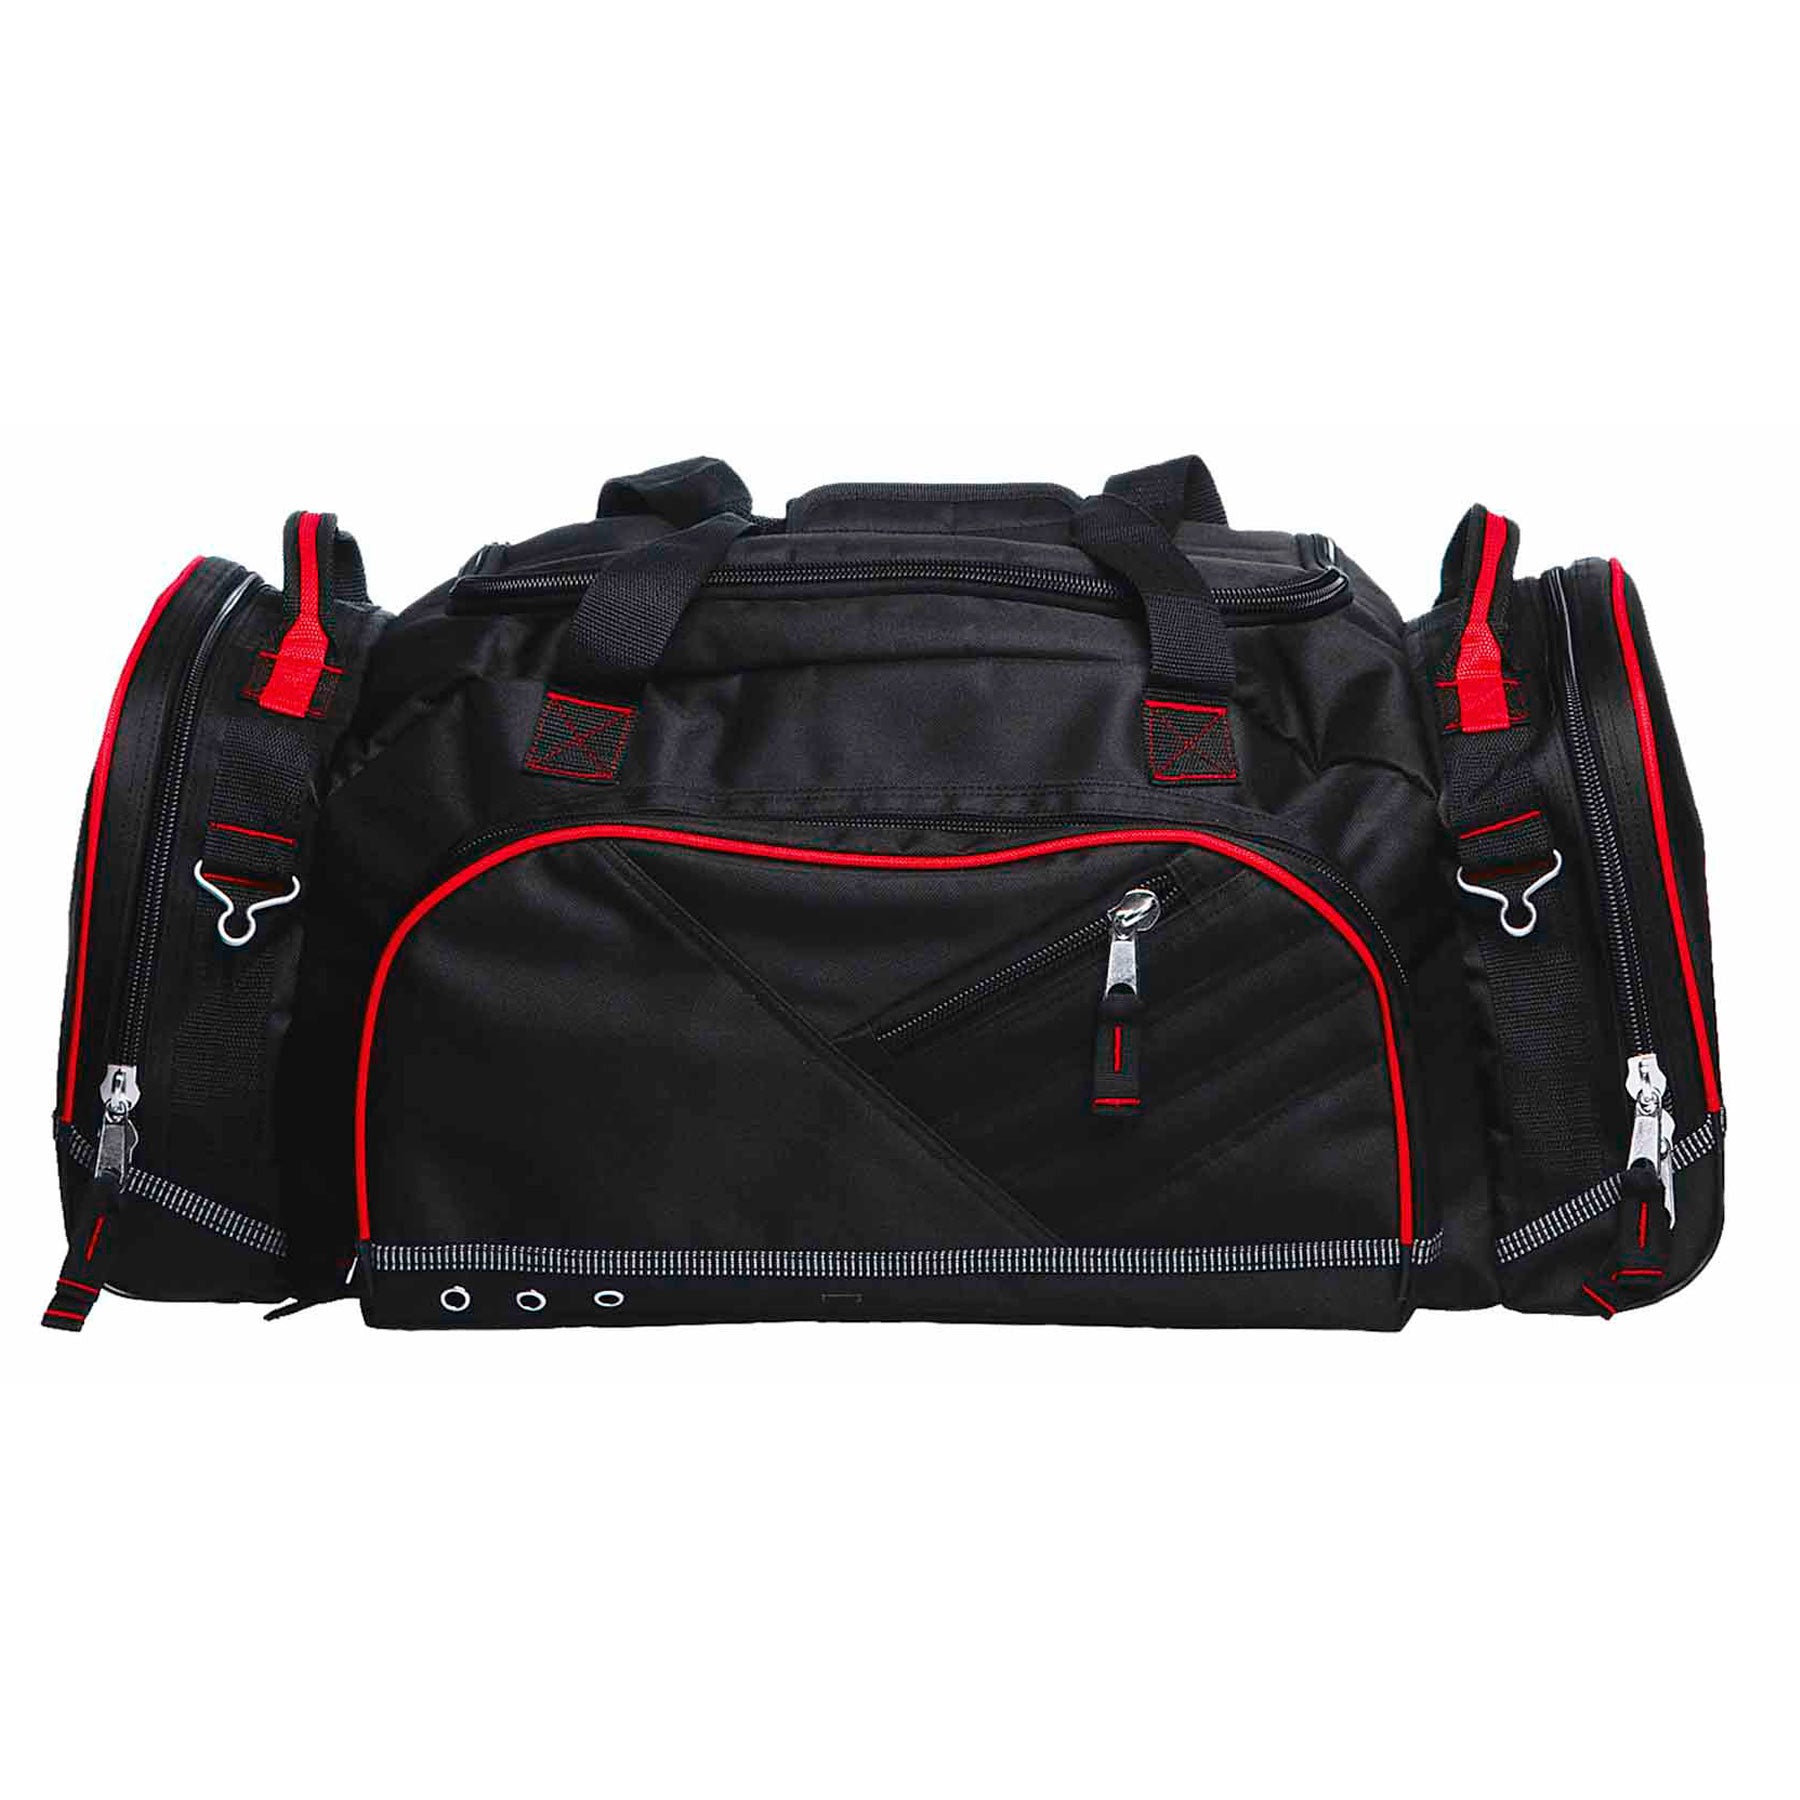 House of Uniforms The Recon Sports Duffle Bag Gear for Life Black/Red